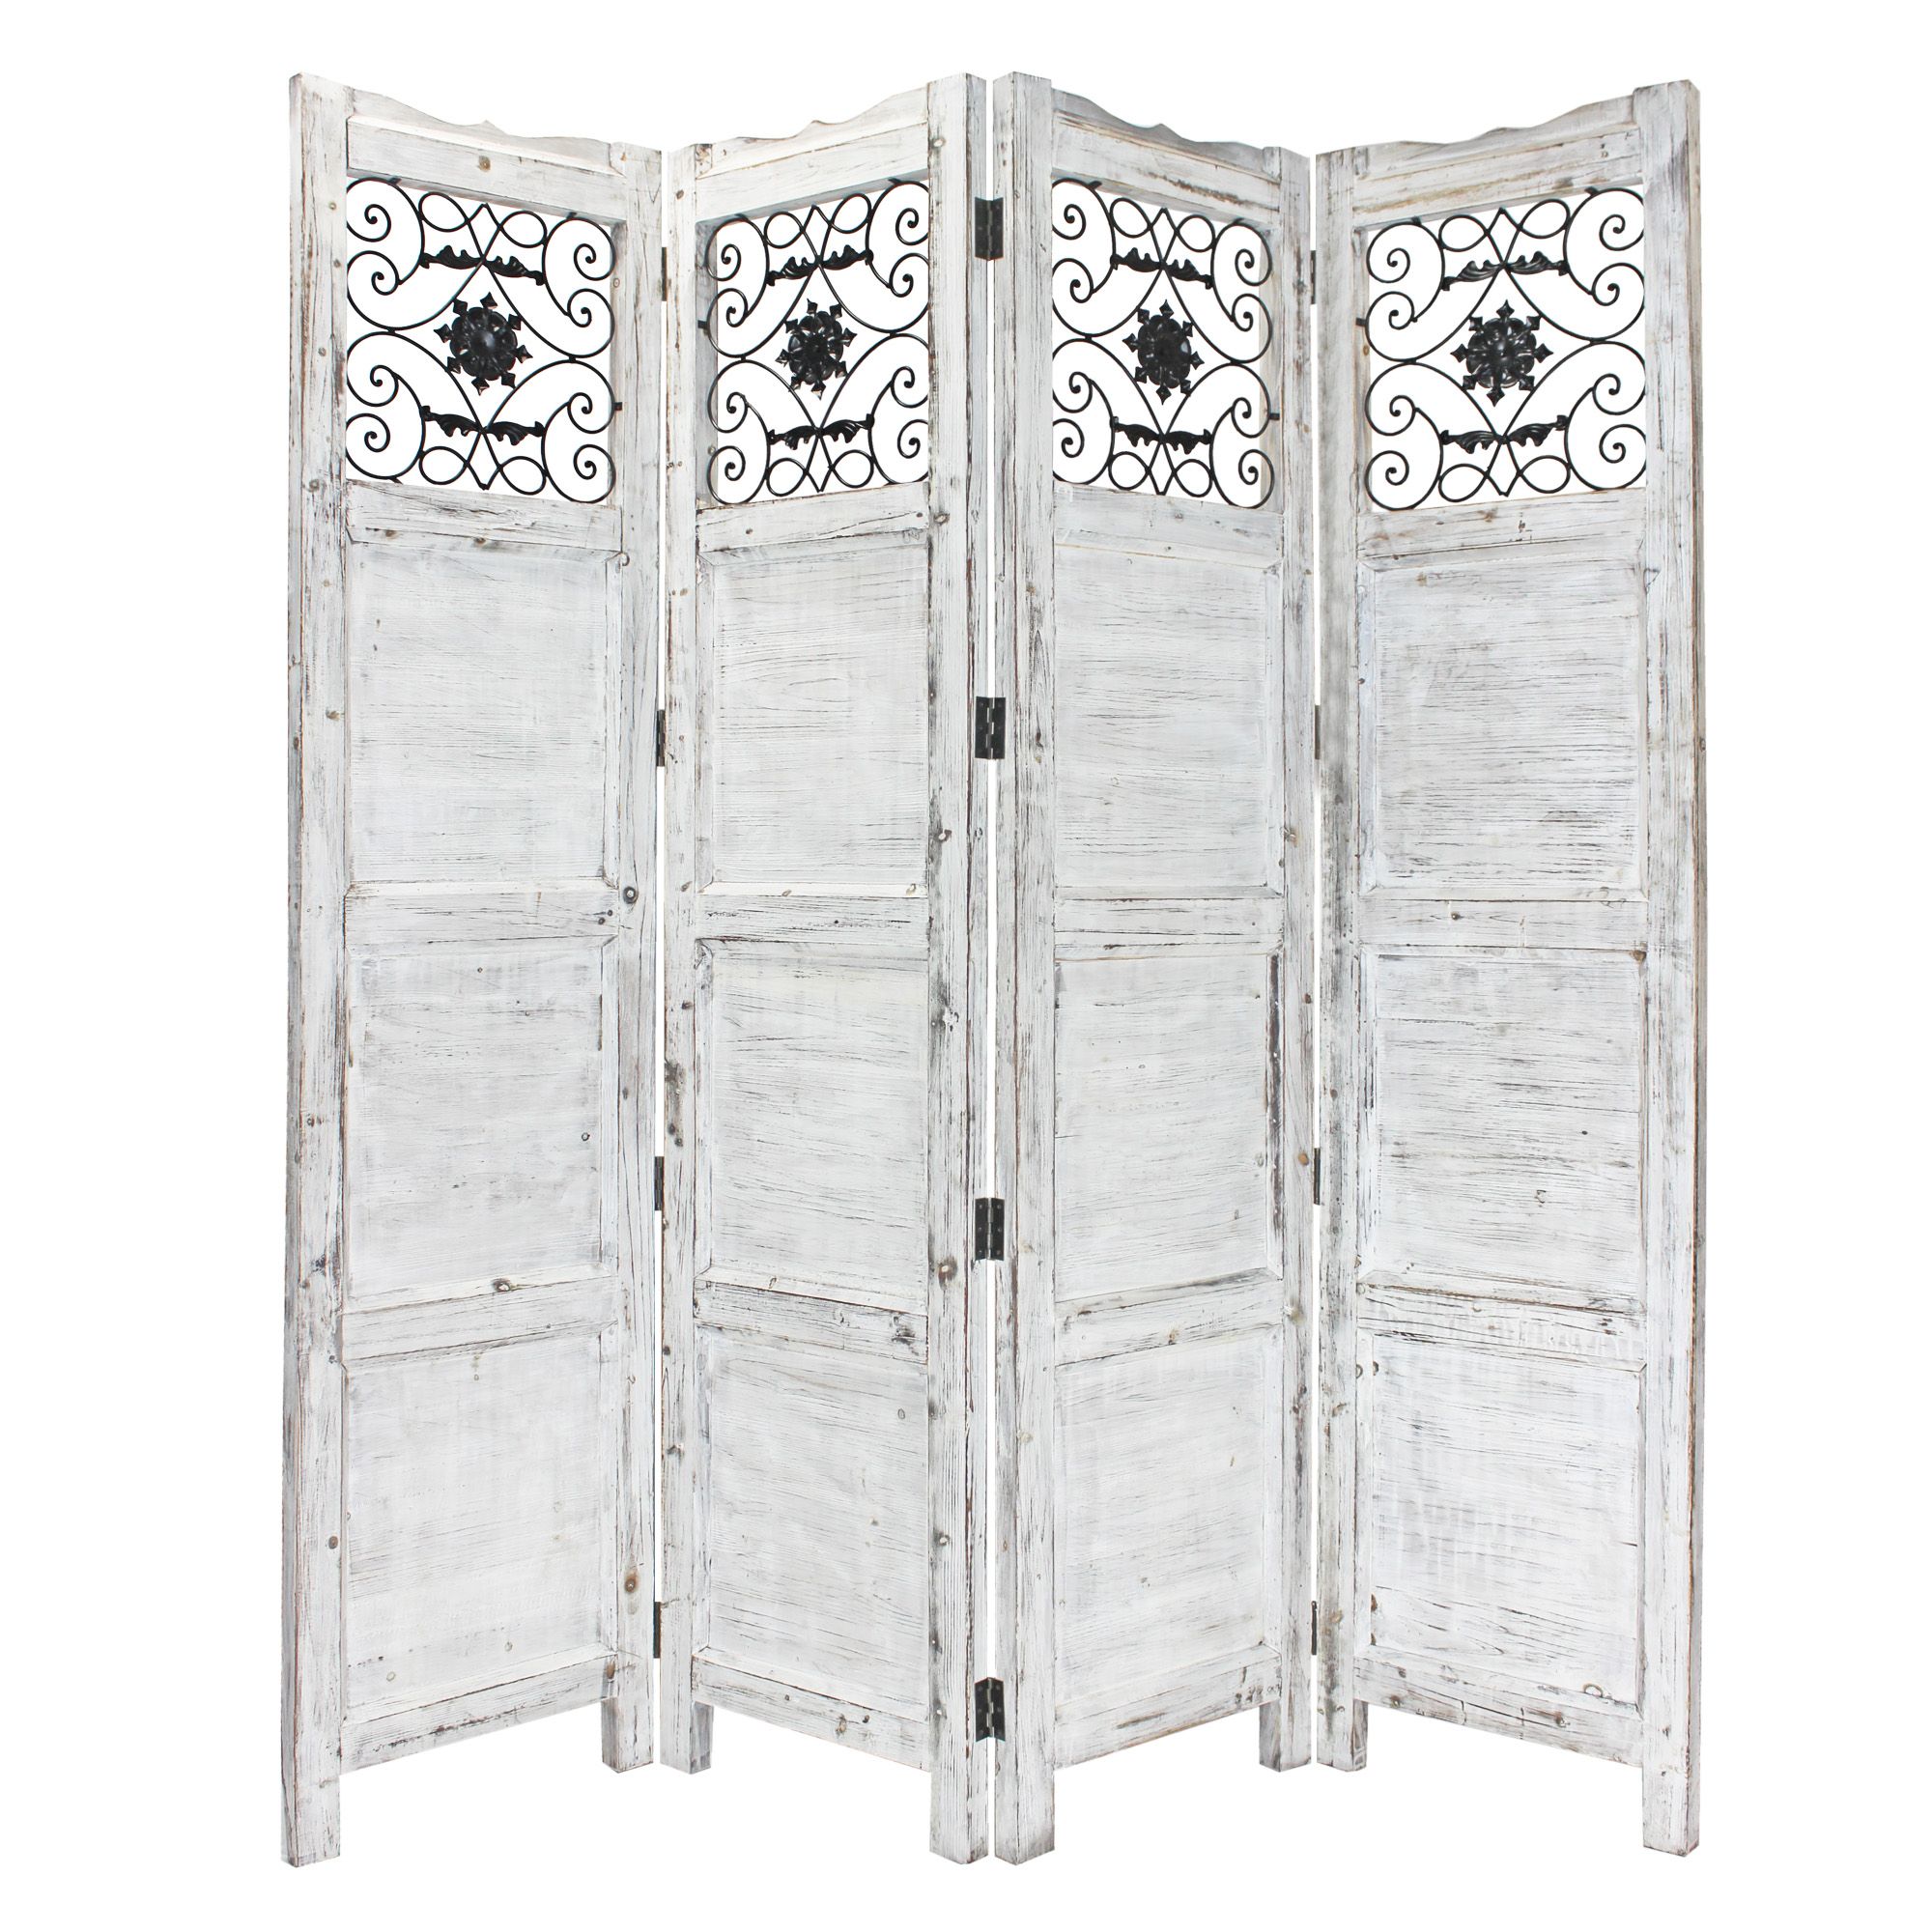 Gray Wash 4 Panel With Scroll Work Room Divider Screen-274888-1